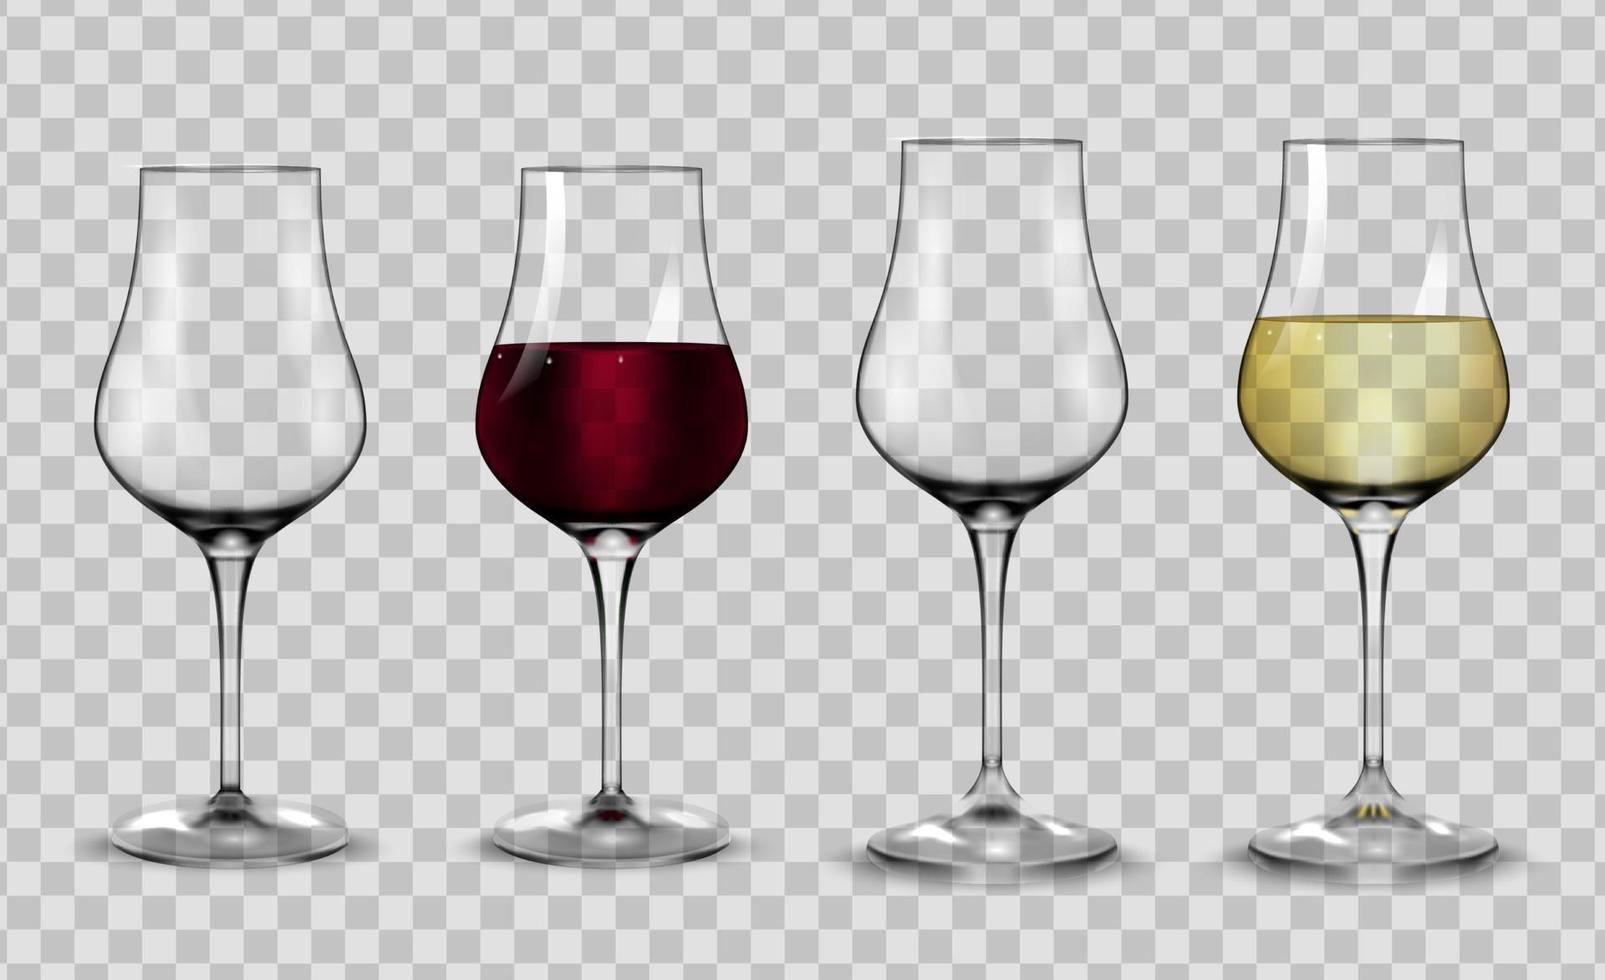 Full and empty glasses for white and red wine. vector